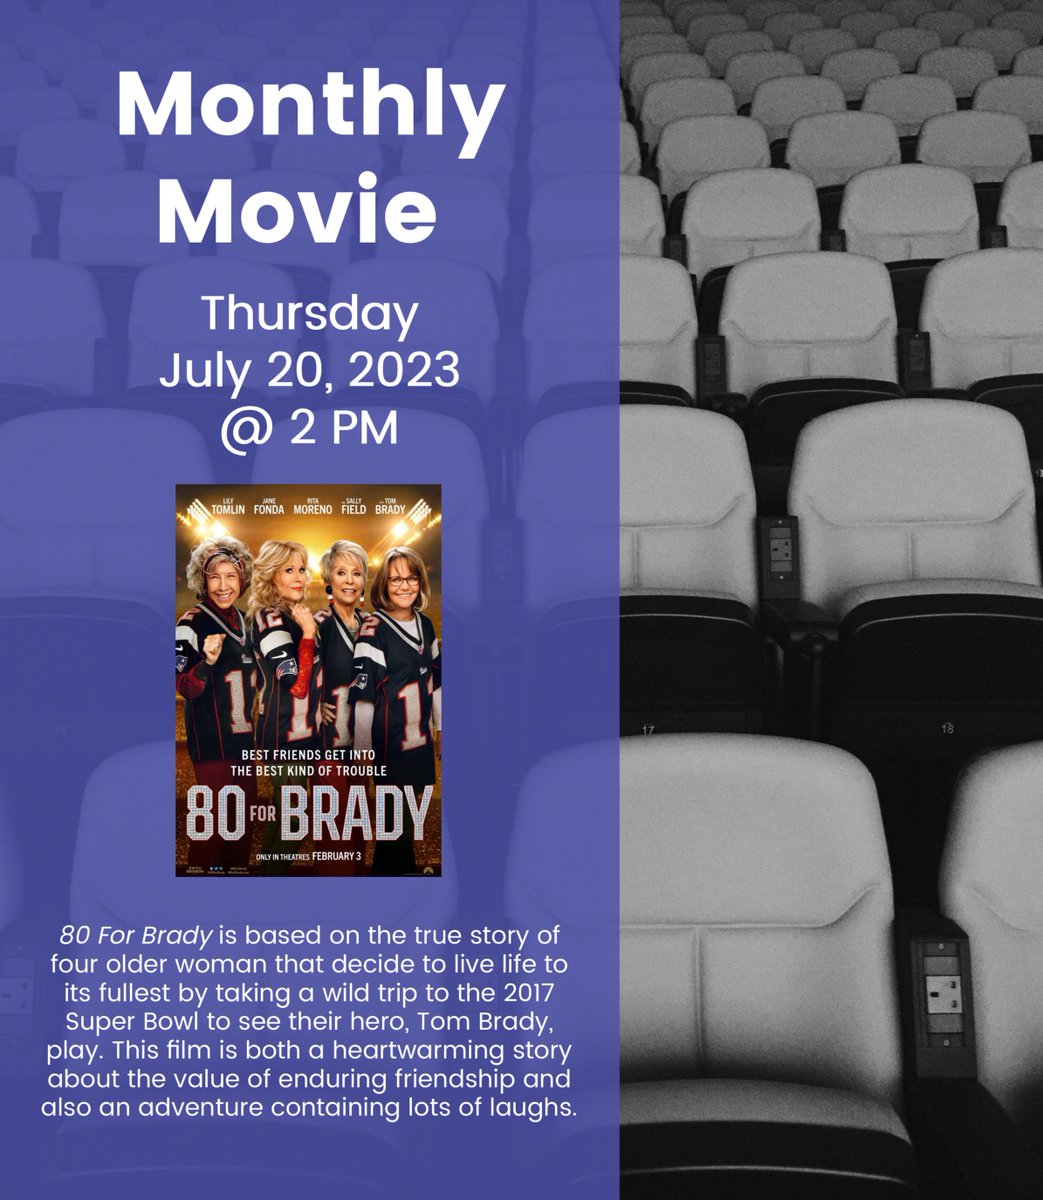 Join us next Thursday for July's monthly movie, 80 for Brady, starring Lily Tomlin, Jane Fonda, Rita Moreno, and Sally Field! https://t.co/gxS8rHjAEc